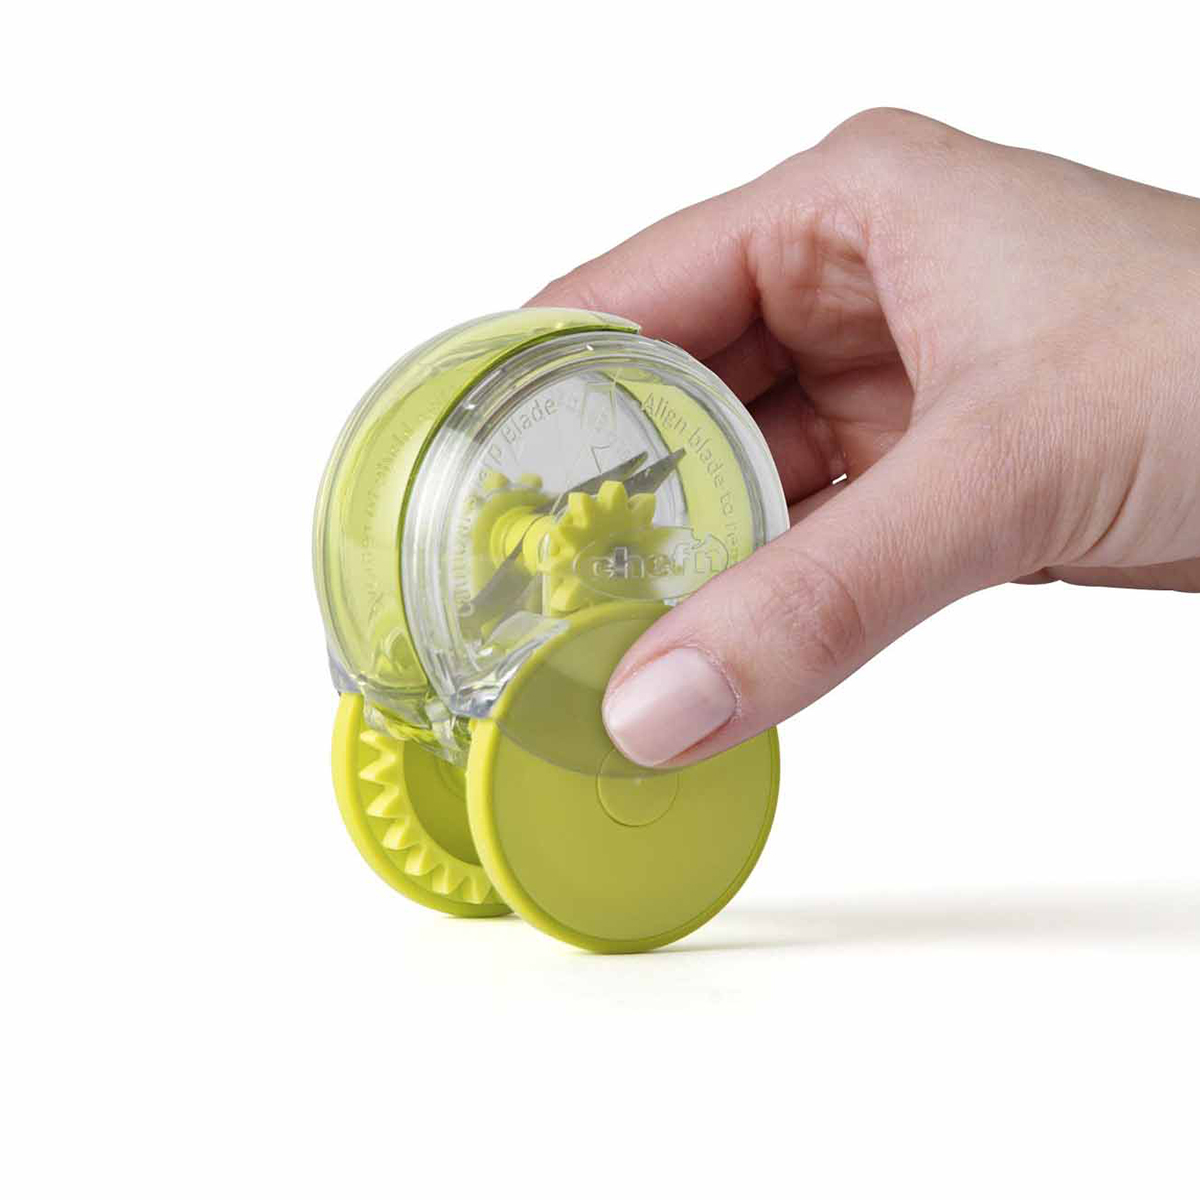 https://www.containerstore.com/catalogimages/372870/10079616-Garlic-Zoom-Chopper-VEN3.jpg